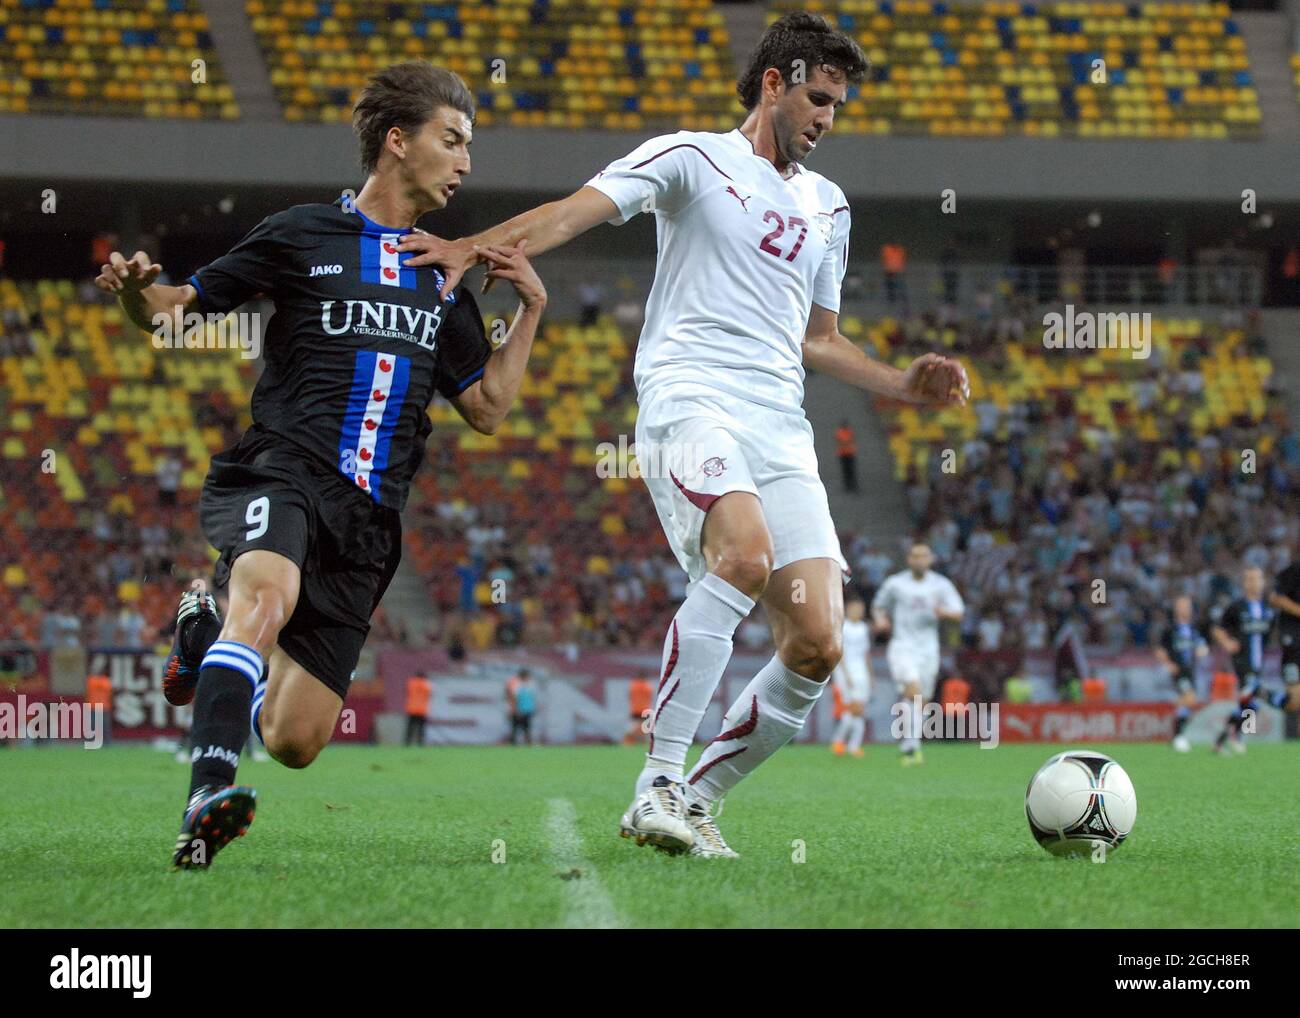 BUCHAREST, ROMANIA - AUGUST 9, 2012: Filip Djuricic (L) of Heerenveen and Glauber (Glauber Leandro Honorato Berti) (R) of Rapid pictured in action during the second leg of the 2012/13 UEFA Europa League Third Qualifying Round game between Rapid Bucuresti and FC Heerenveen at National Arena. Stock Photo